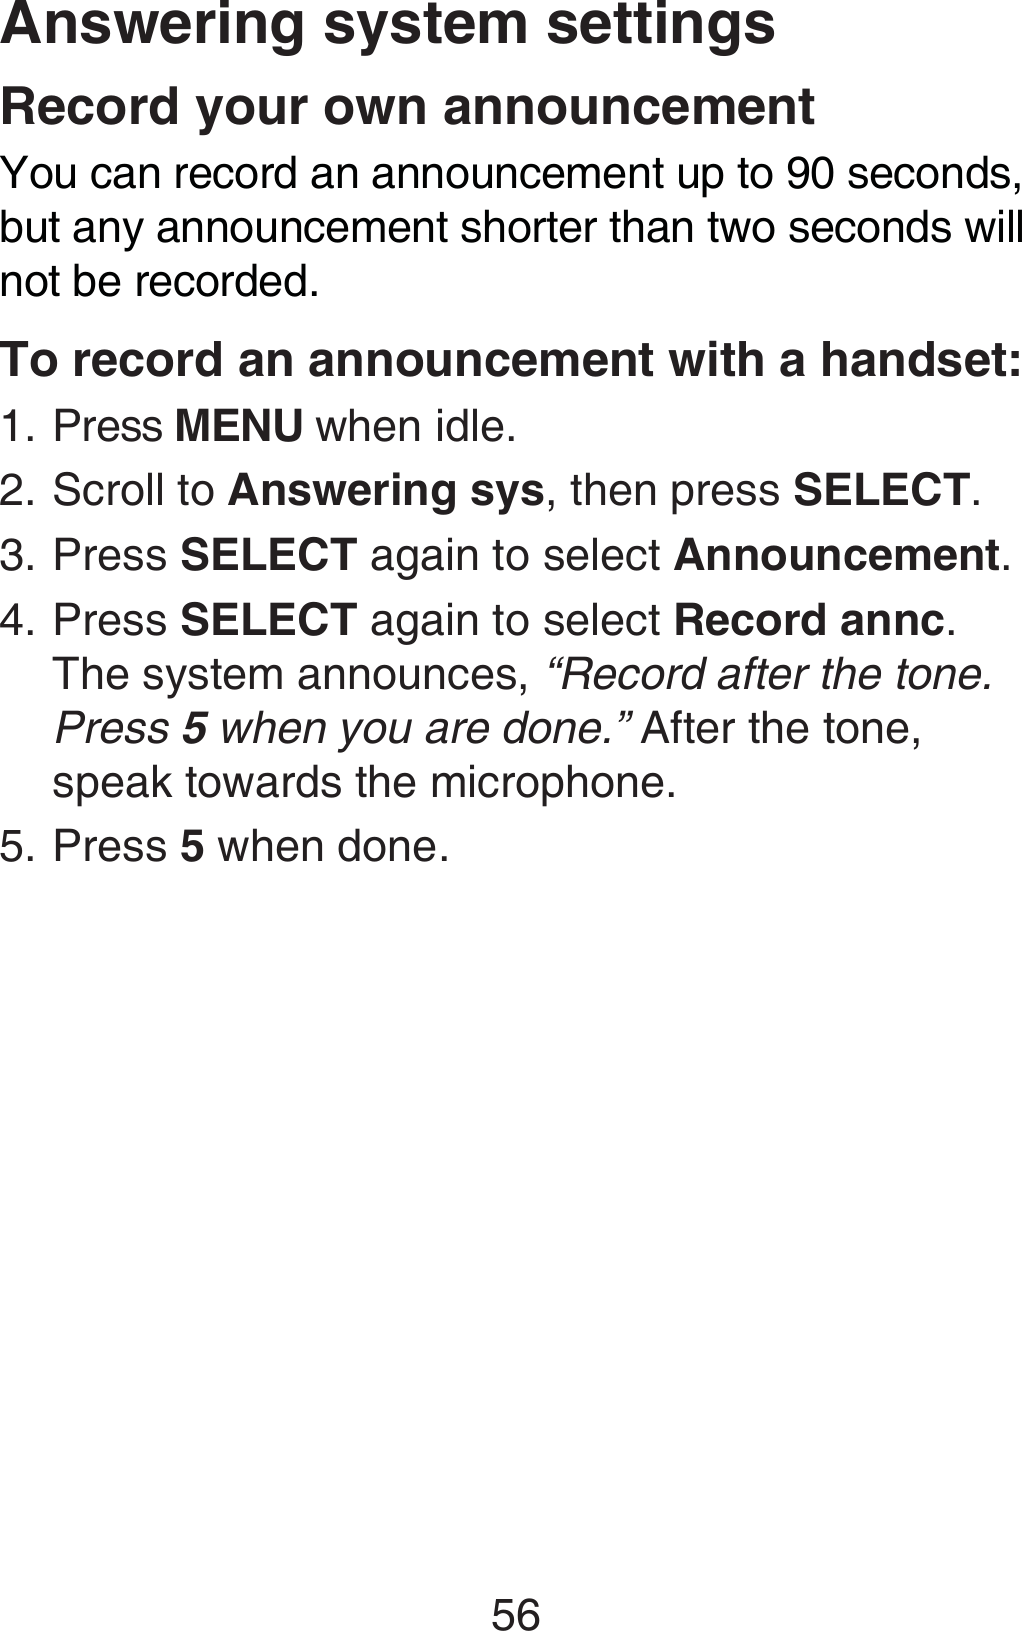 56Answering system settingsRecord your own announcementYou can record an announcement up to 90 seconds, but any announcement shorter than two seconds will not be recorded.To record an announcement with a handset:Press MENU when idle.Scroll to Answering sys, then press SELECT.Press SELECT again to select Announcement.Press SELECT again to select Record annc. The system announces, “Record after the tone. Press 5 when you are done.” After the tone, speak towards the microphone.Press 5 when done.1.2.3.4.5.